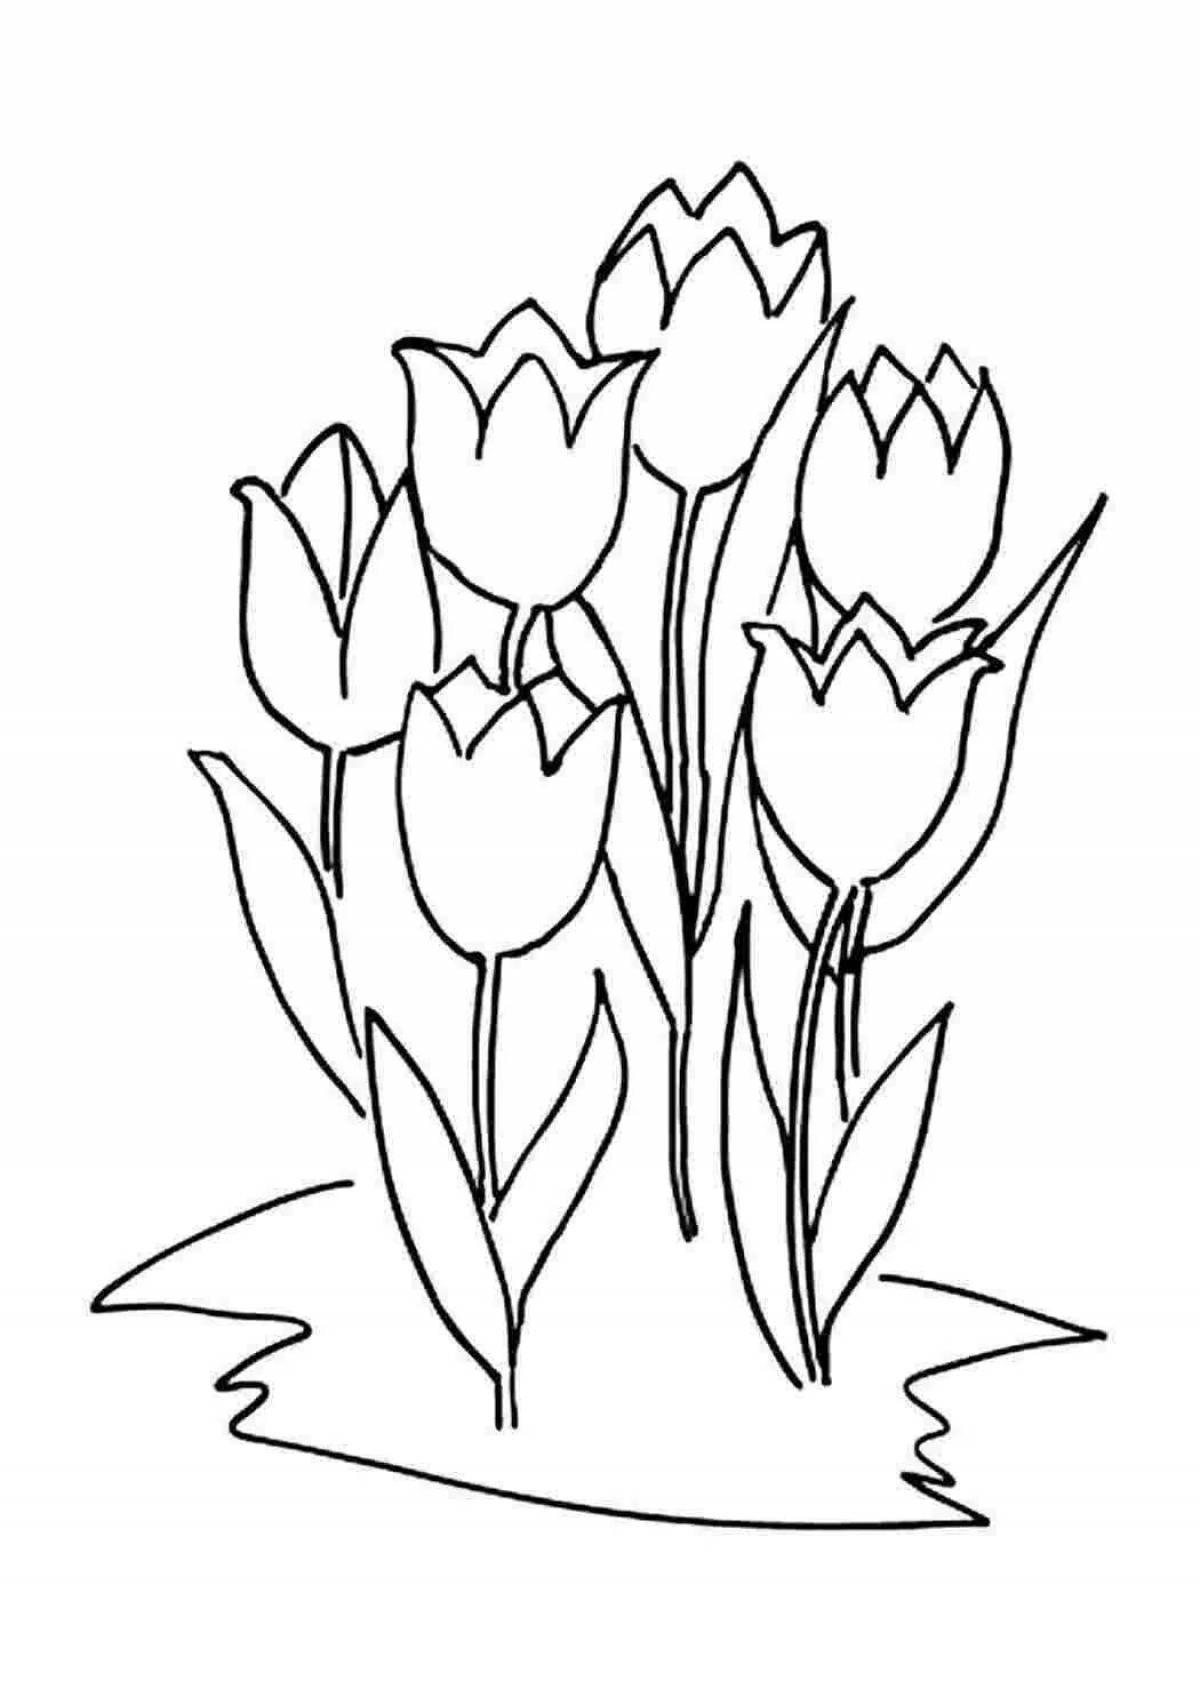 Live coloring tulips March 8